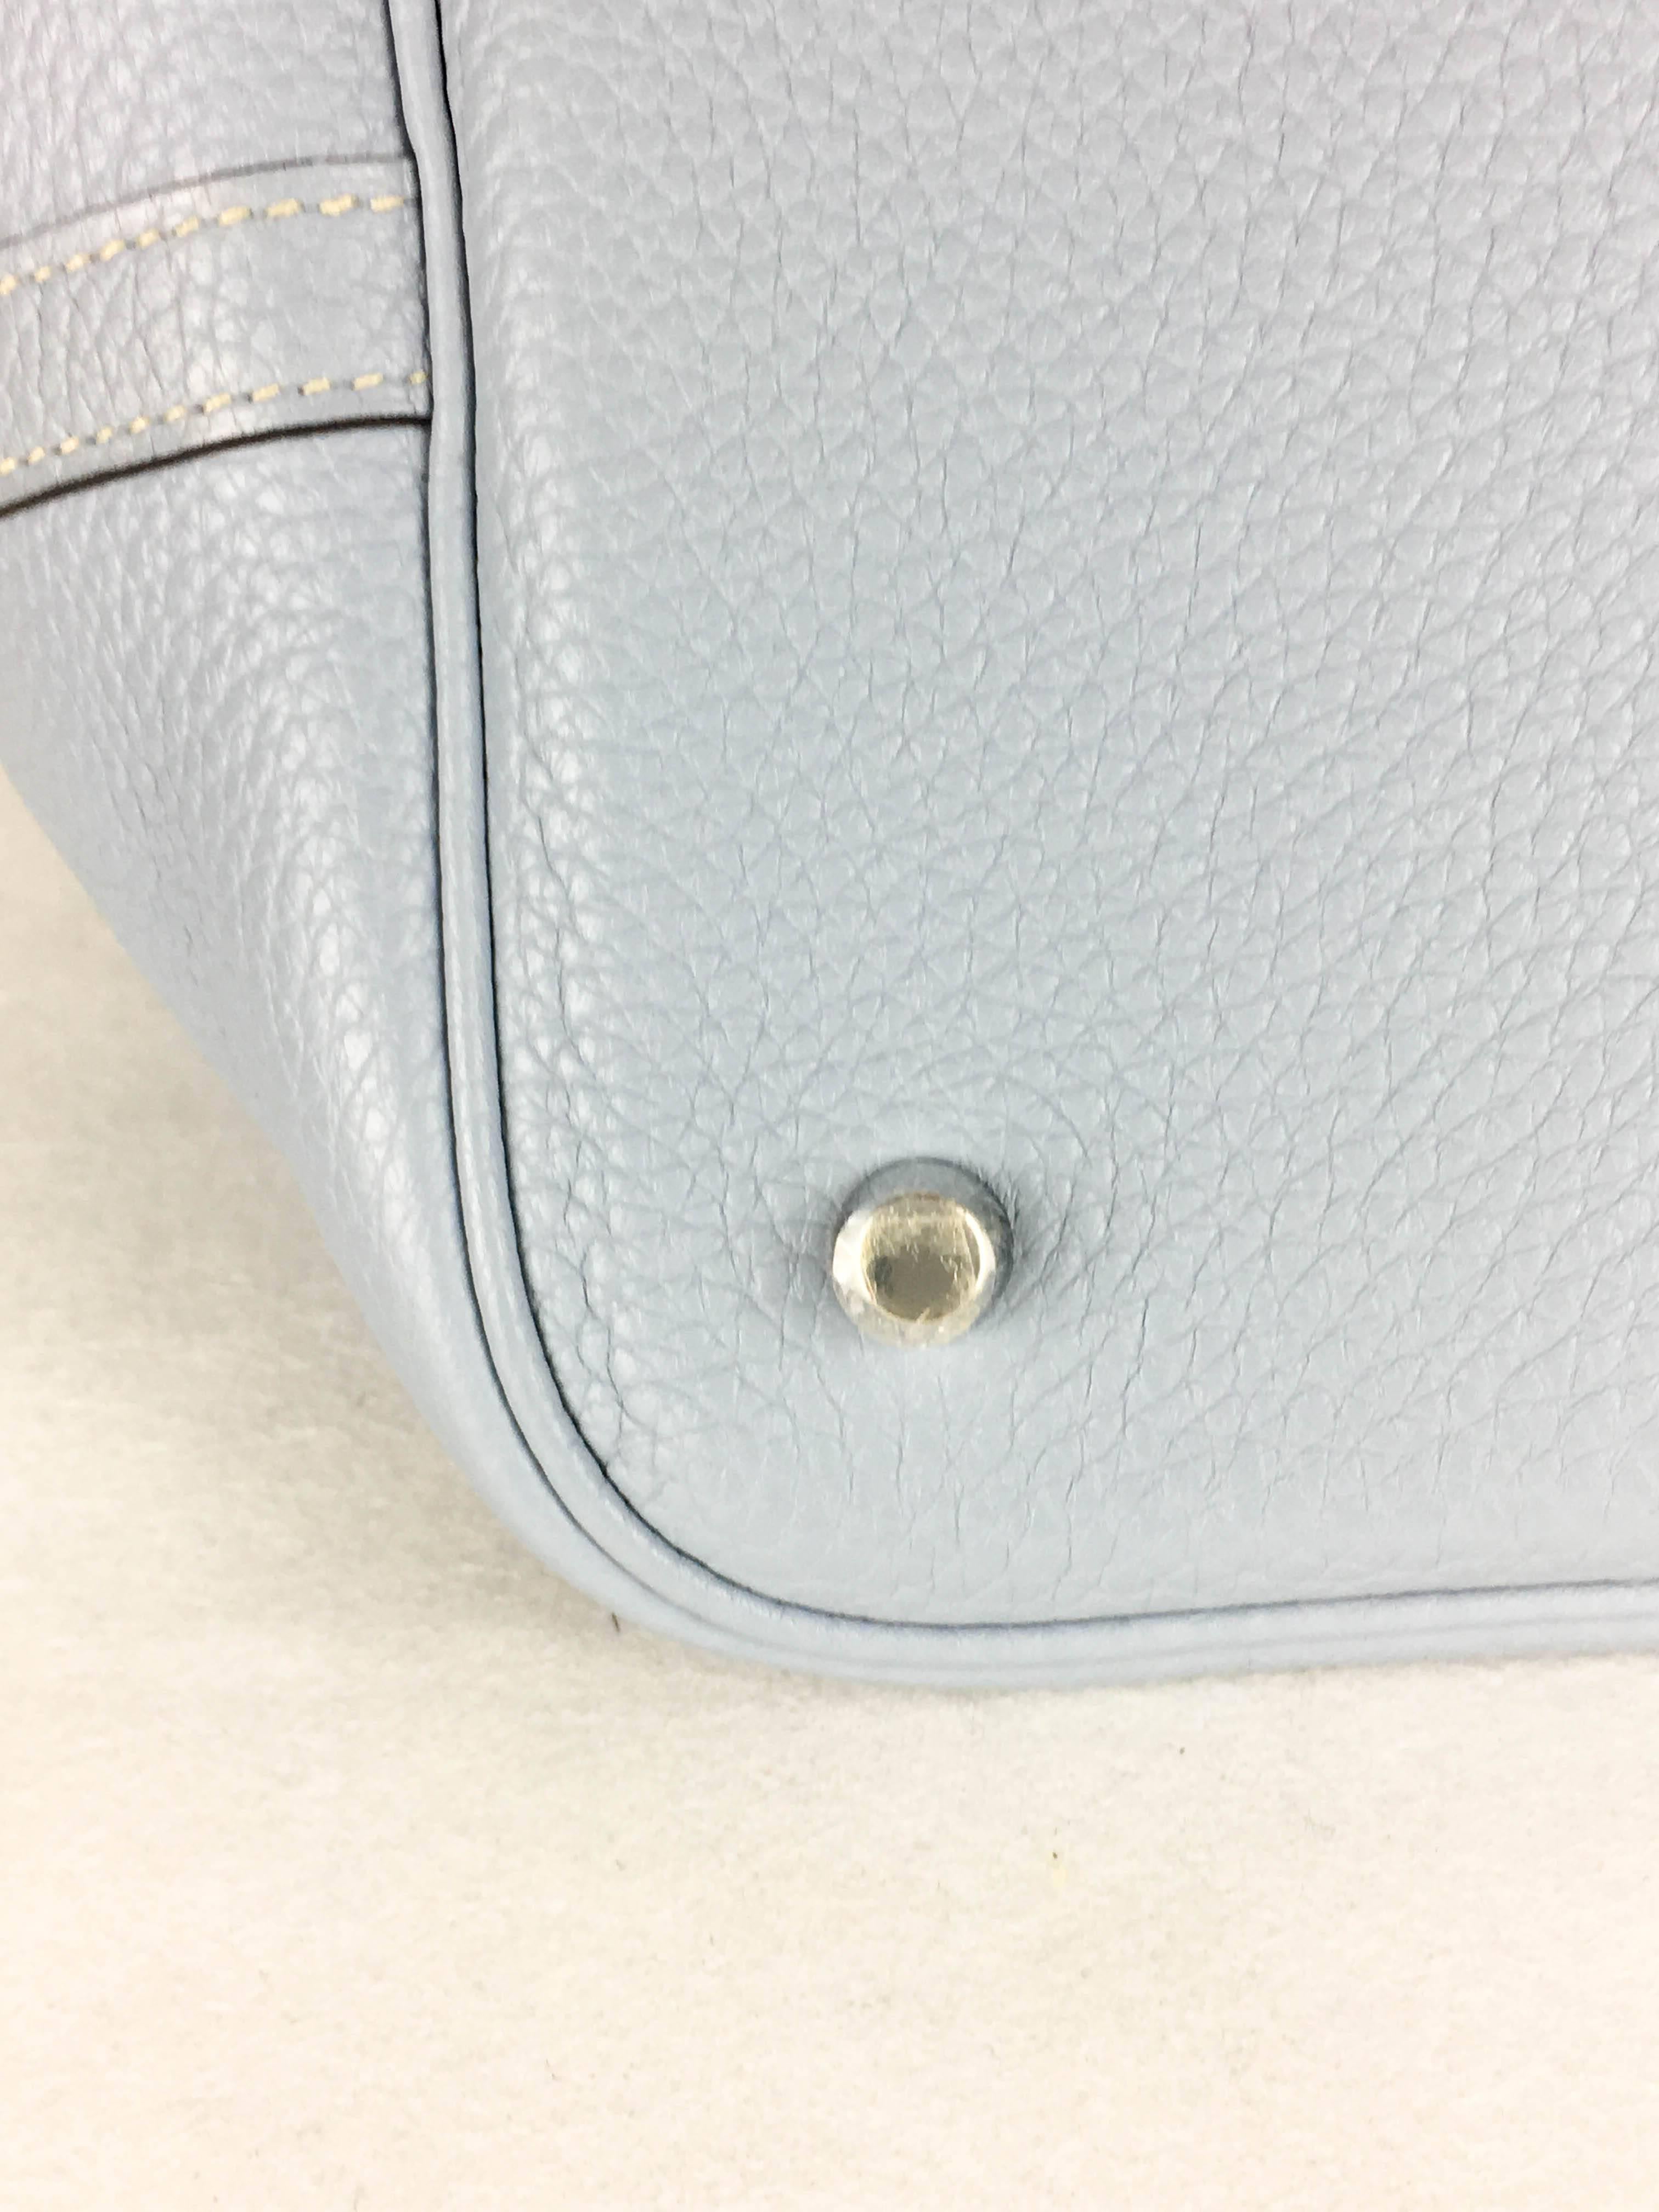 2014 Hermes Picotin 22 Handbag in Pale Blue Clemence Leather For Sale 1